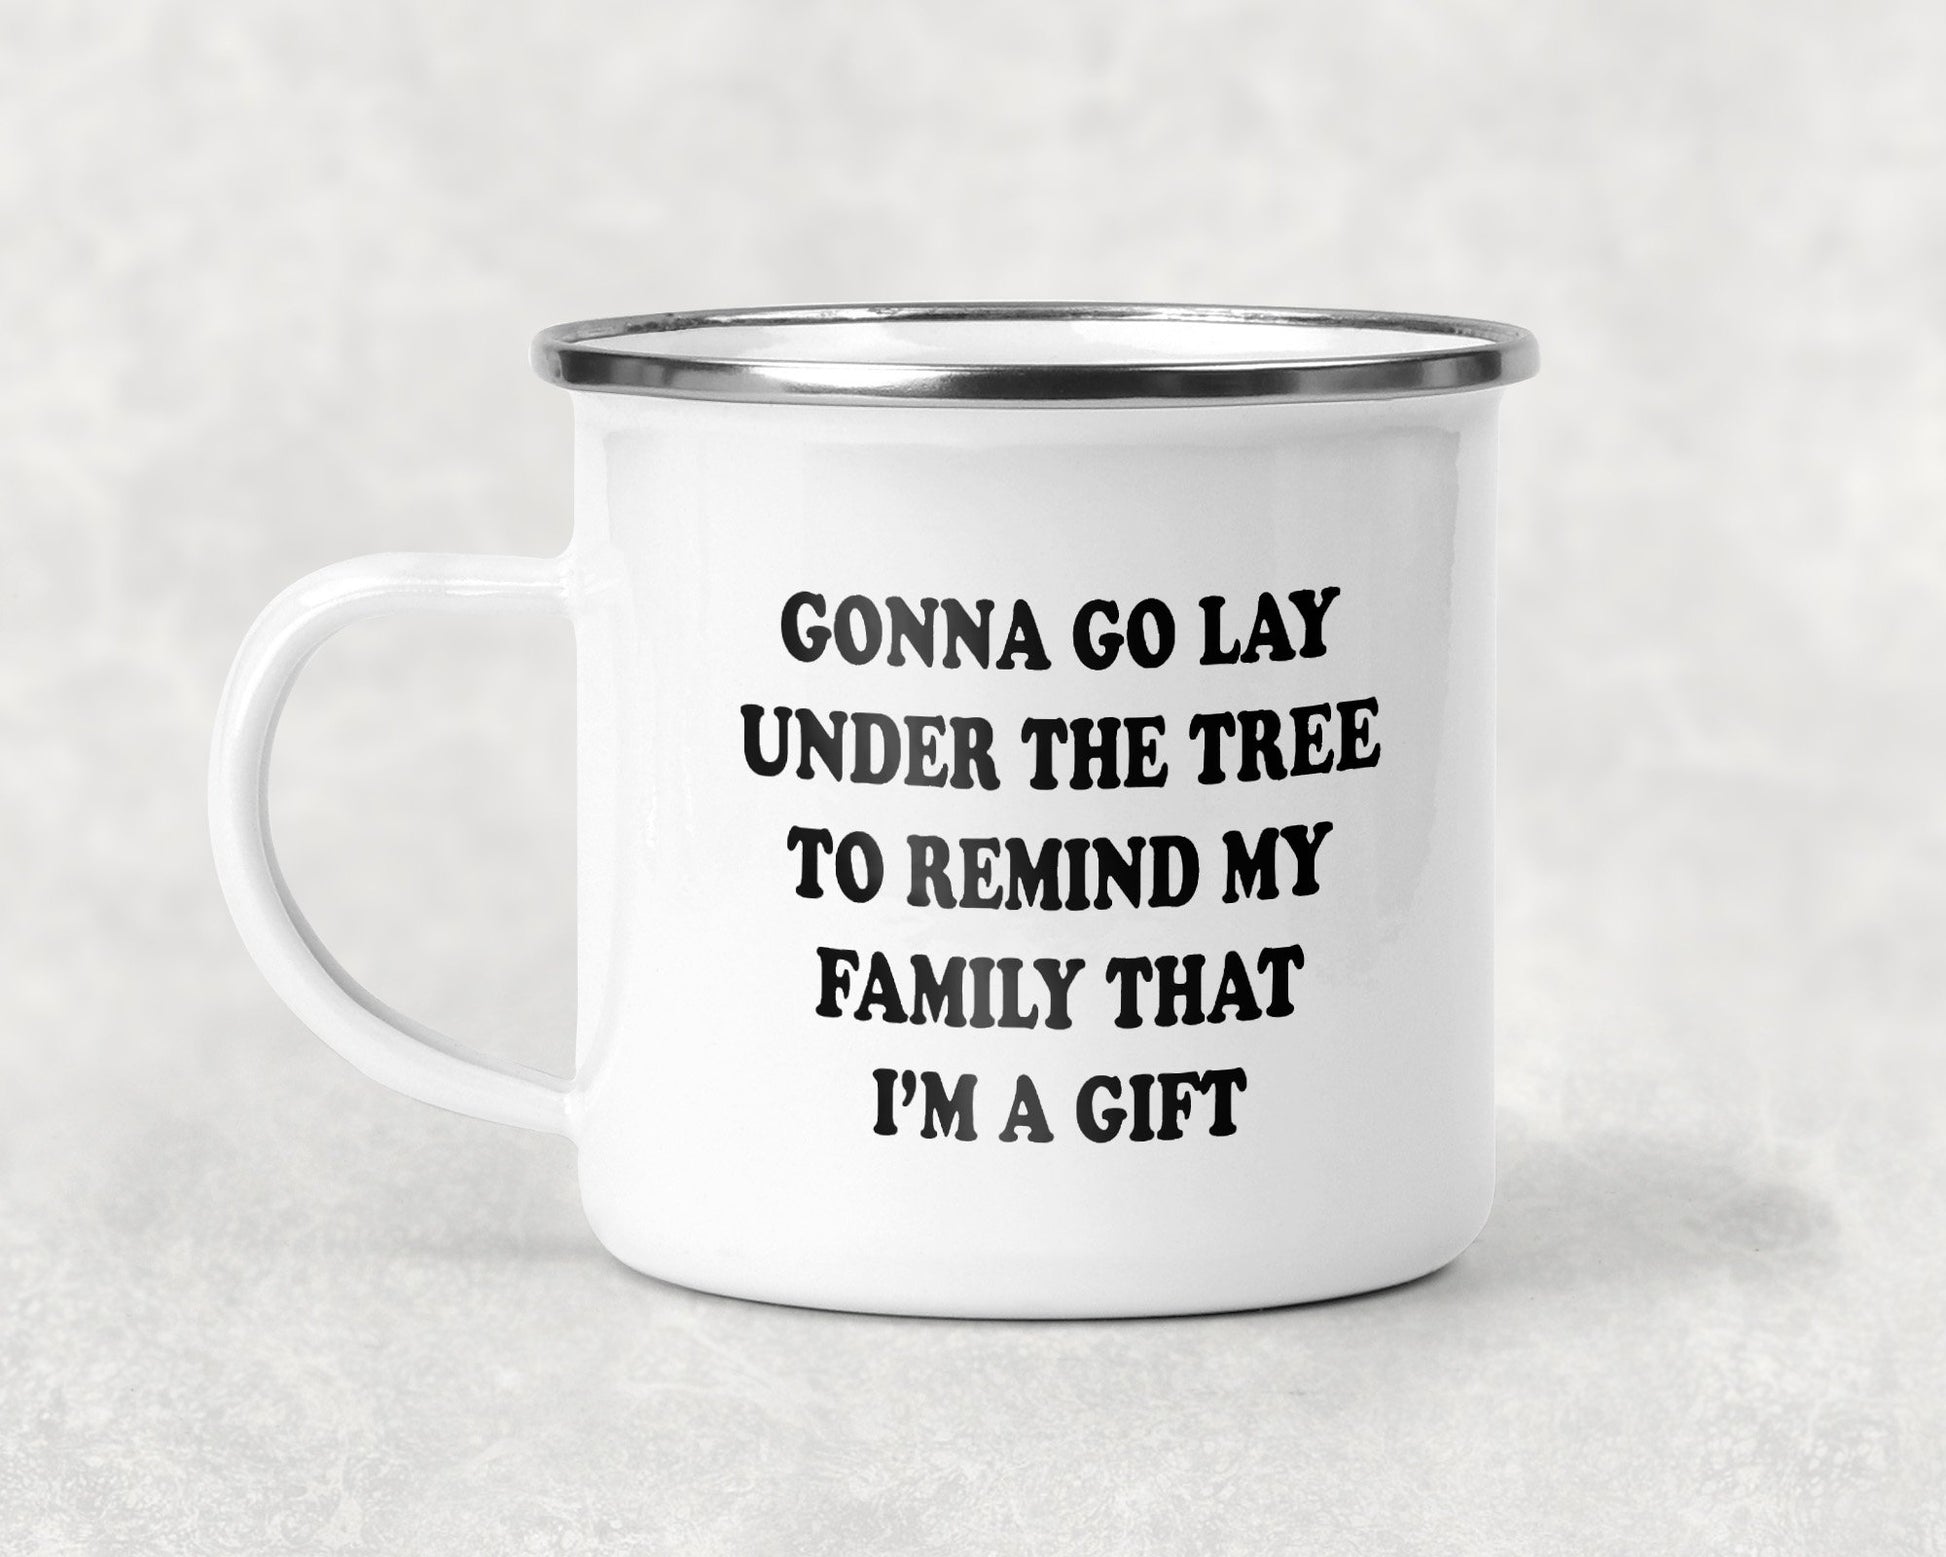 Gonna Go Lay Under The Tree To Remind My Family That Im A Gift Mug Coffee